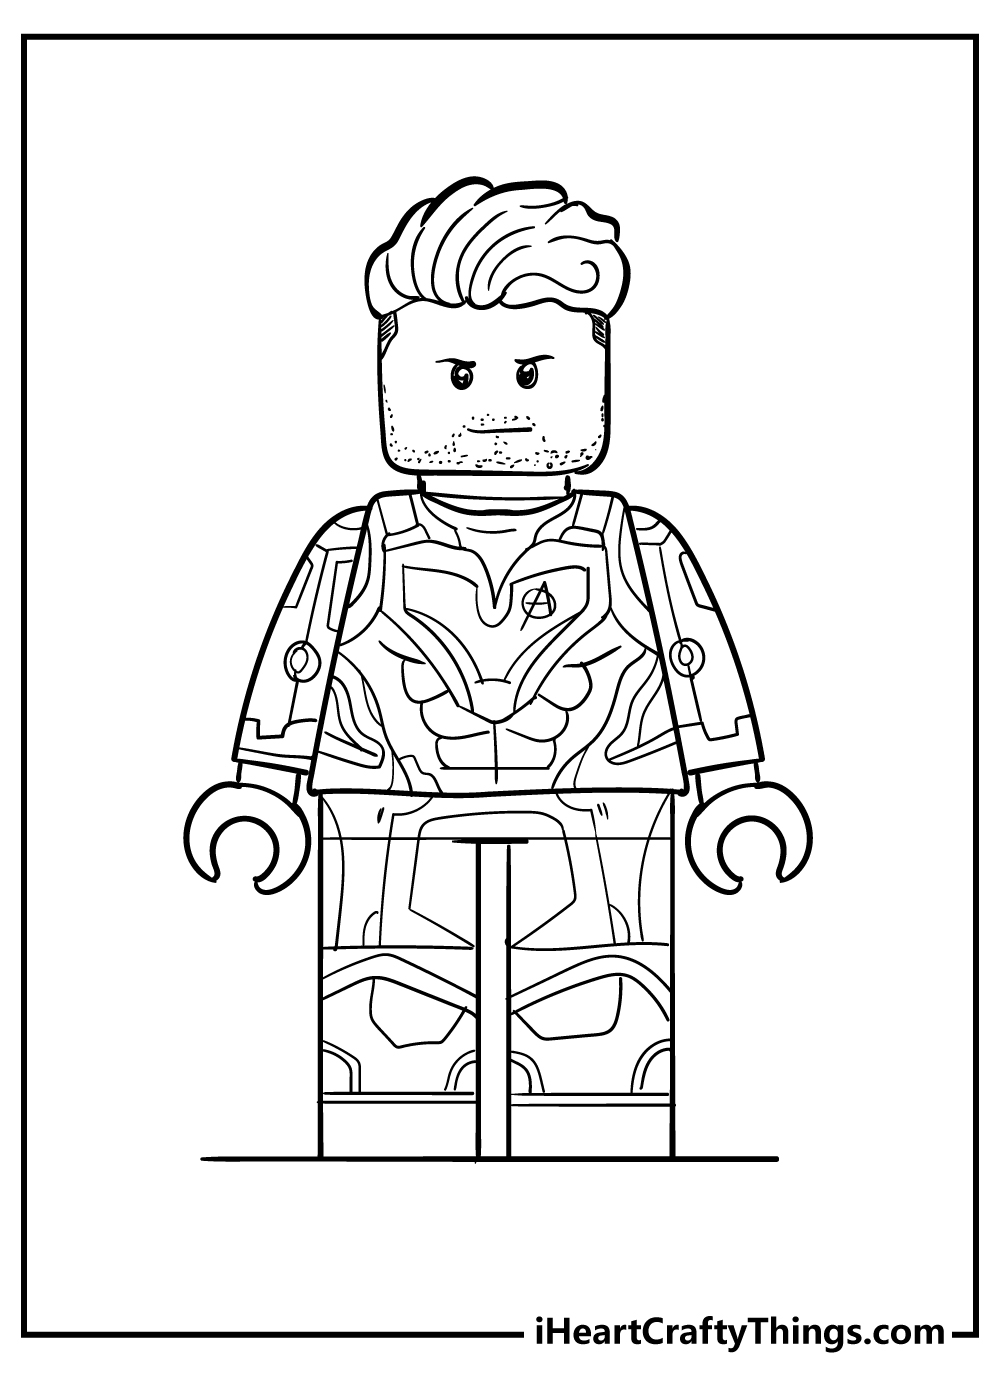 Lego Avengers Coloring Book for adults free download